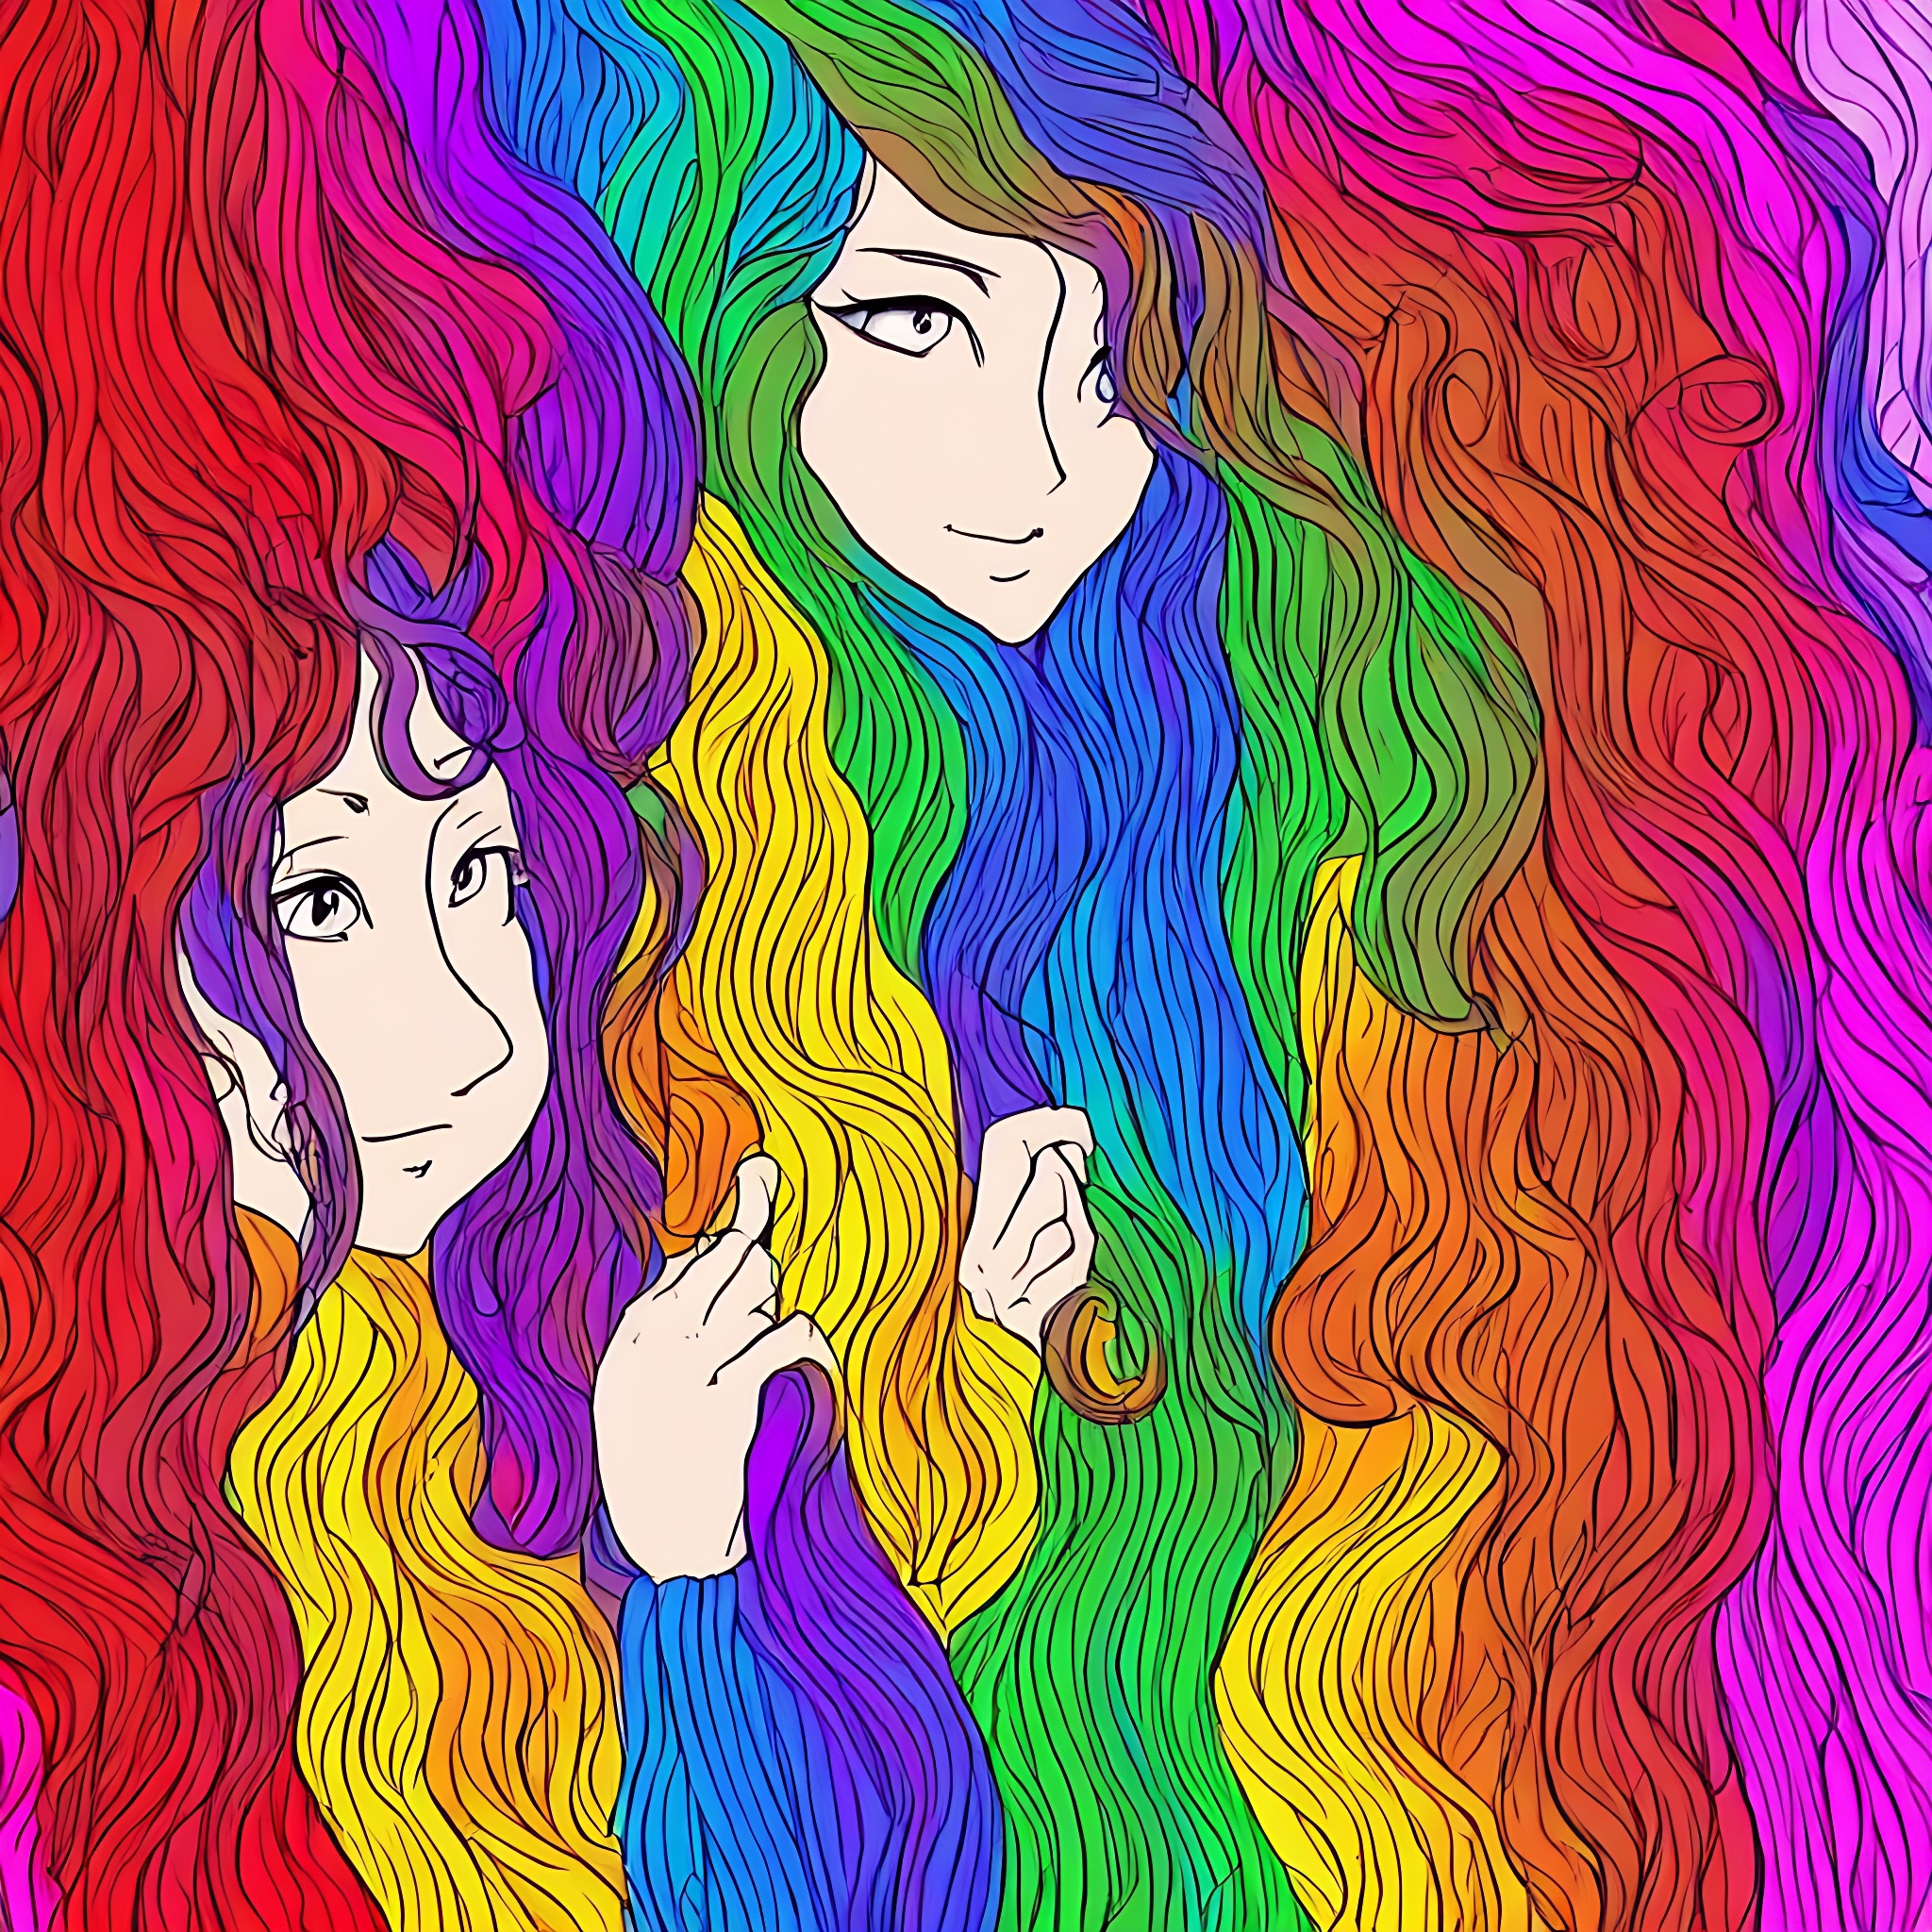 woman-with-long-curled-hair-in-every-color-of-the-rainbow-anime-stable-diffusion